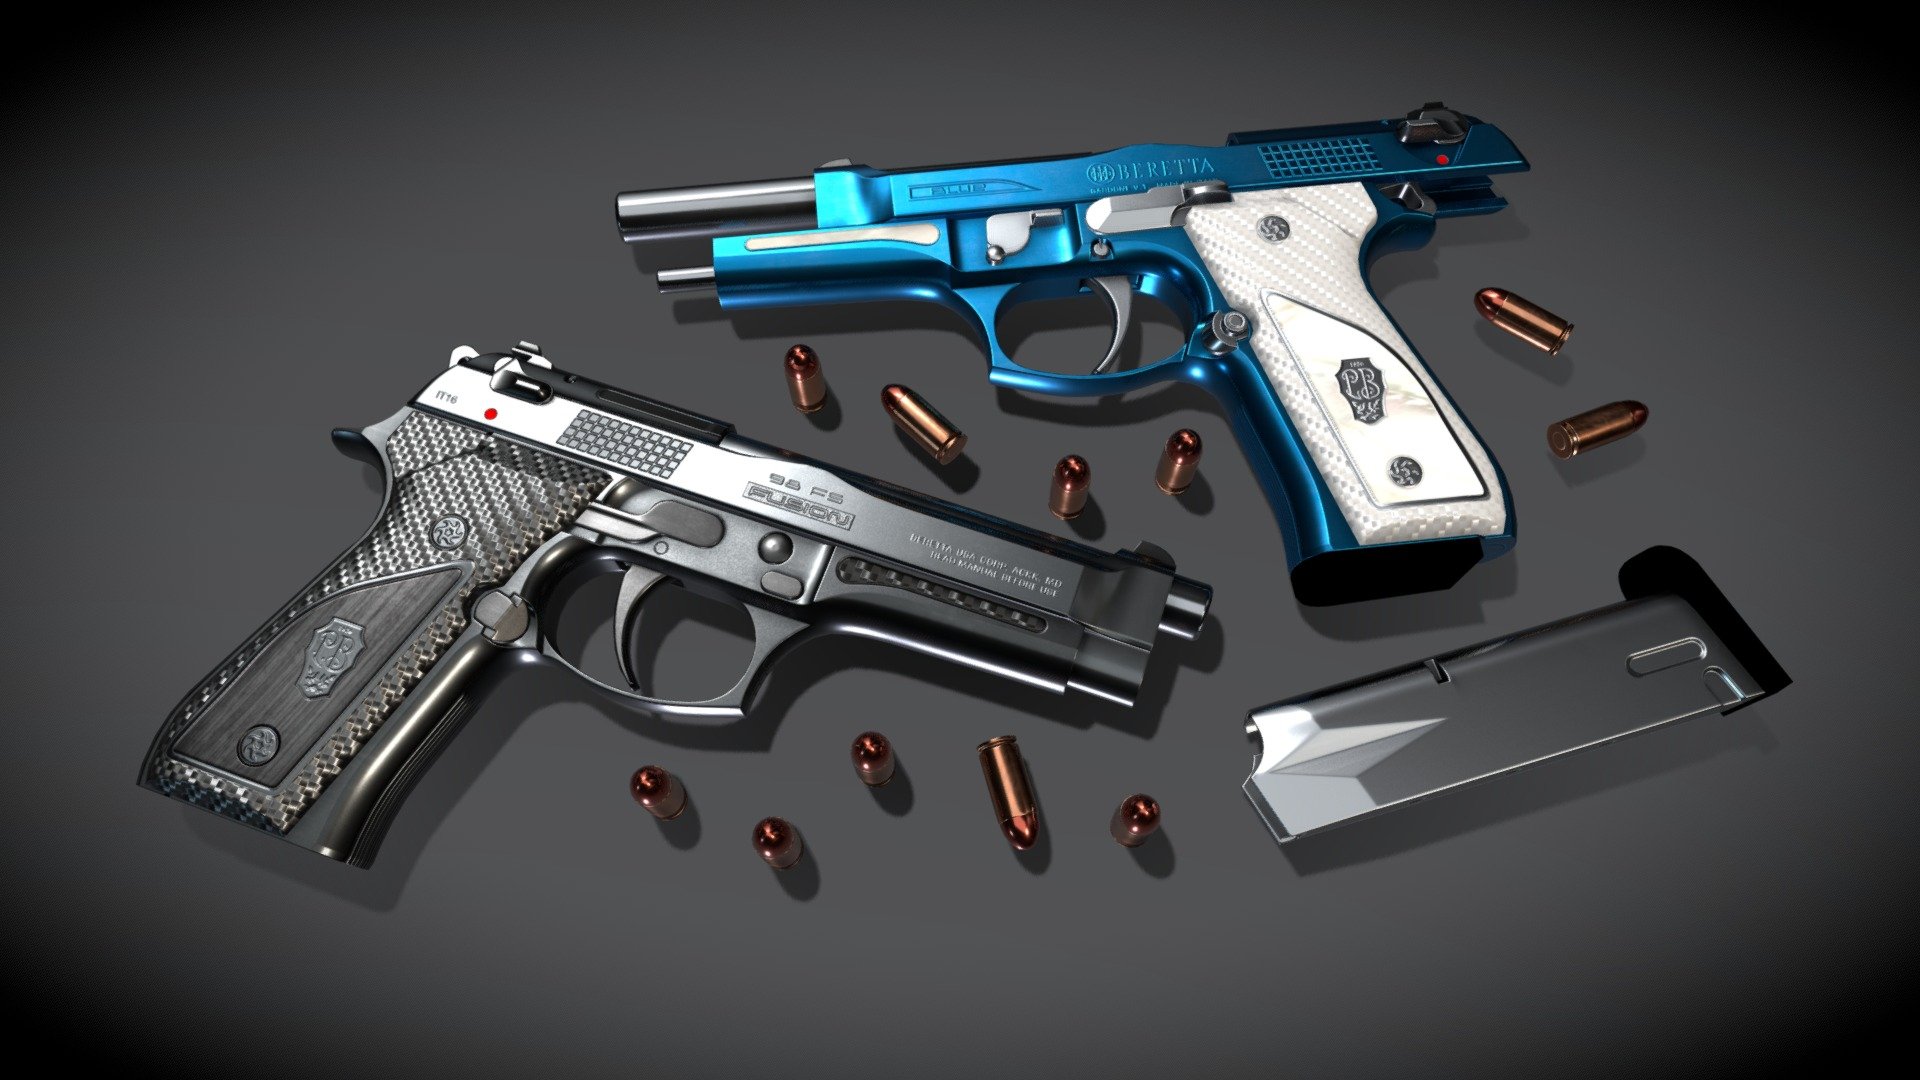 Game-ready high quality low poly model, 2k PBR Textures
Beretta Fusion (Faces: 7176  / Verts: 3806)
Bullet (Faces: 504 / Verts: 256)

Download Link: https://gamebanana.com/models/4395 - "Black & Blue" (Beretta Fusion) - 3D model by eNse7en 3d model